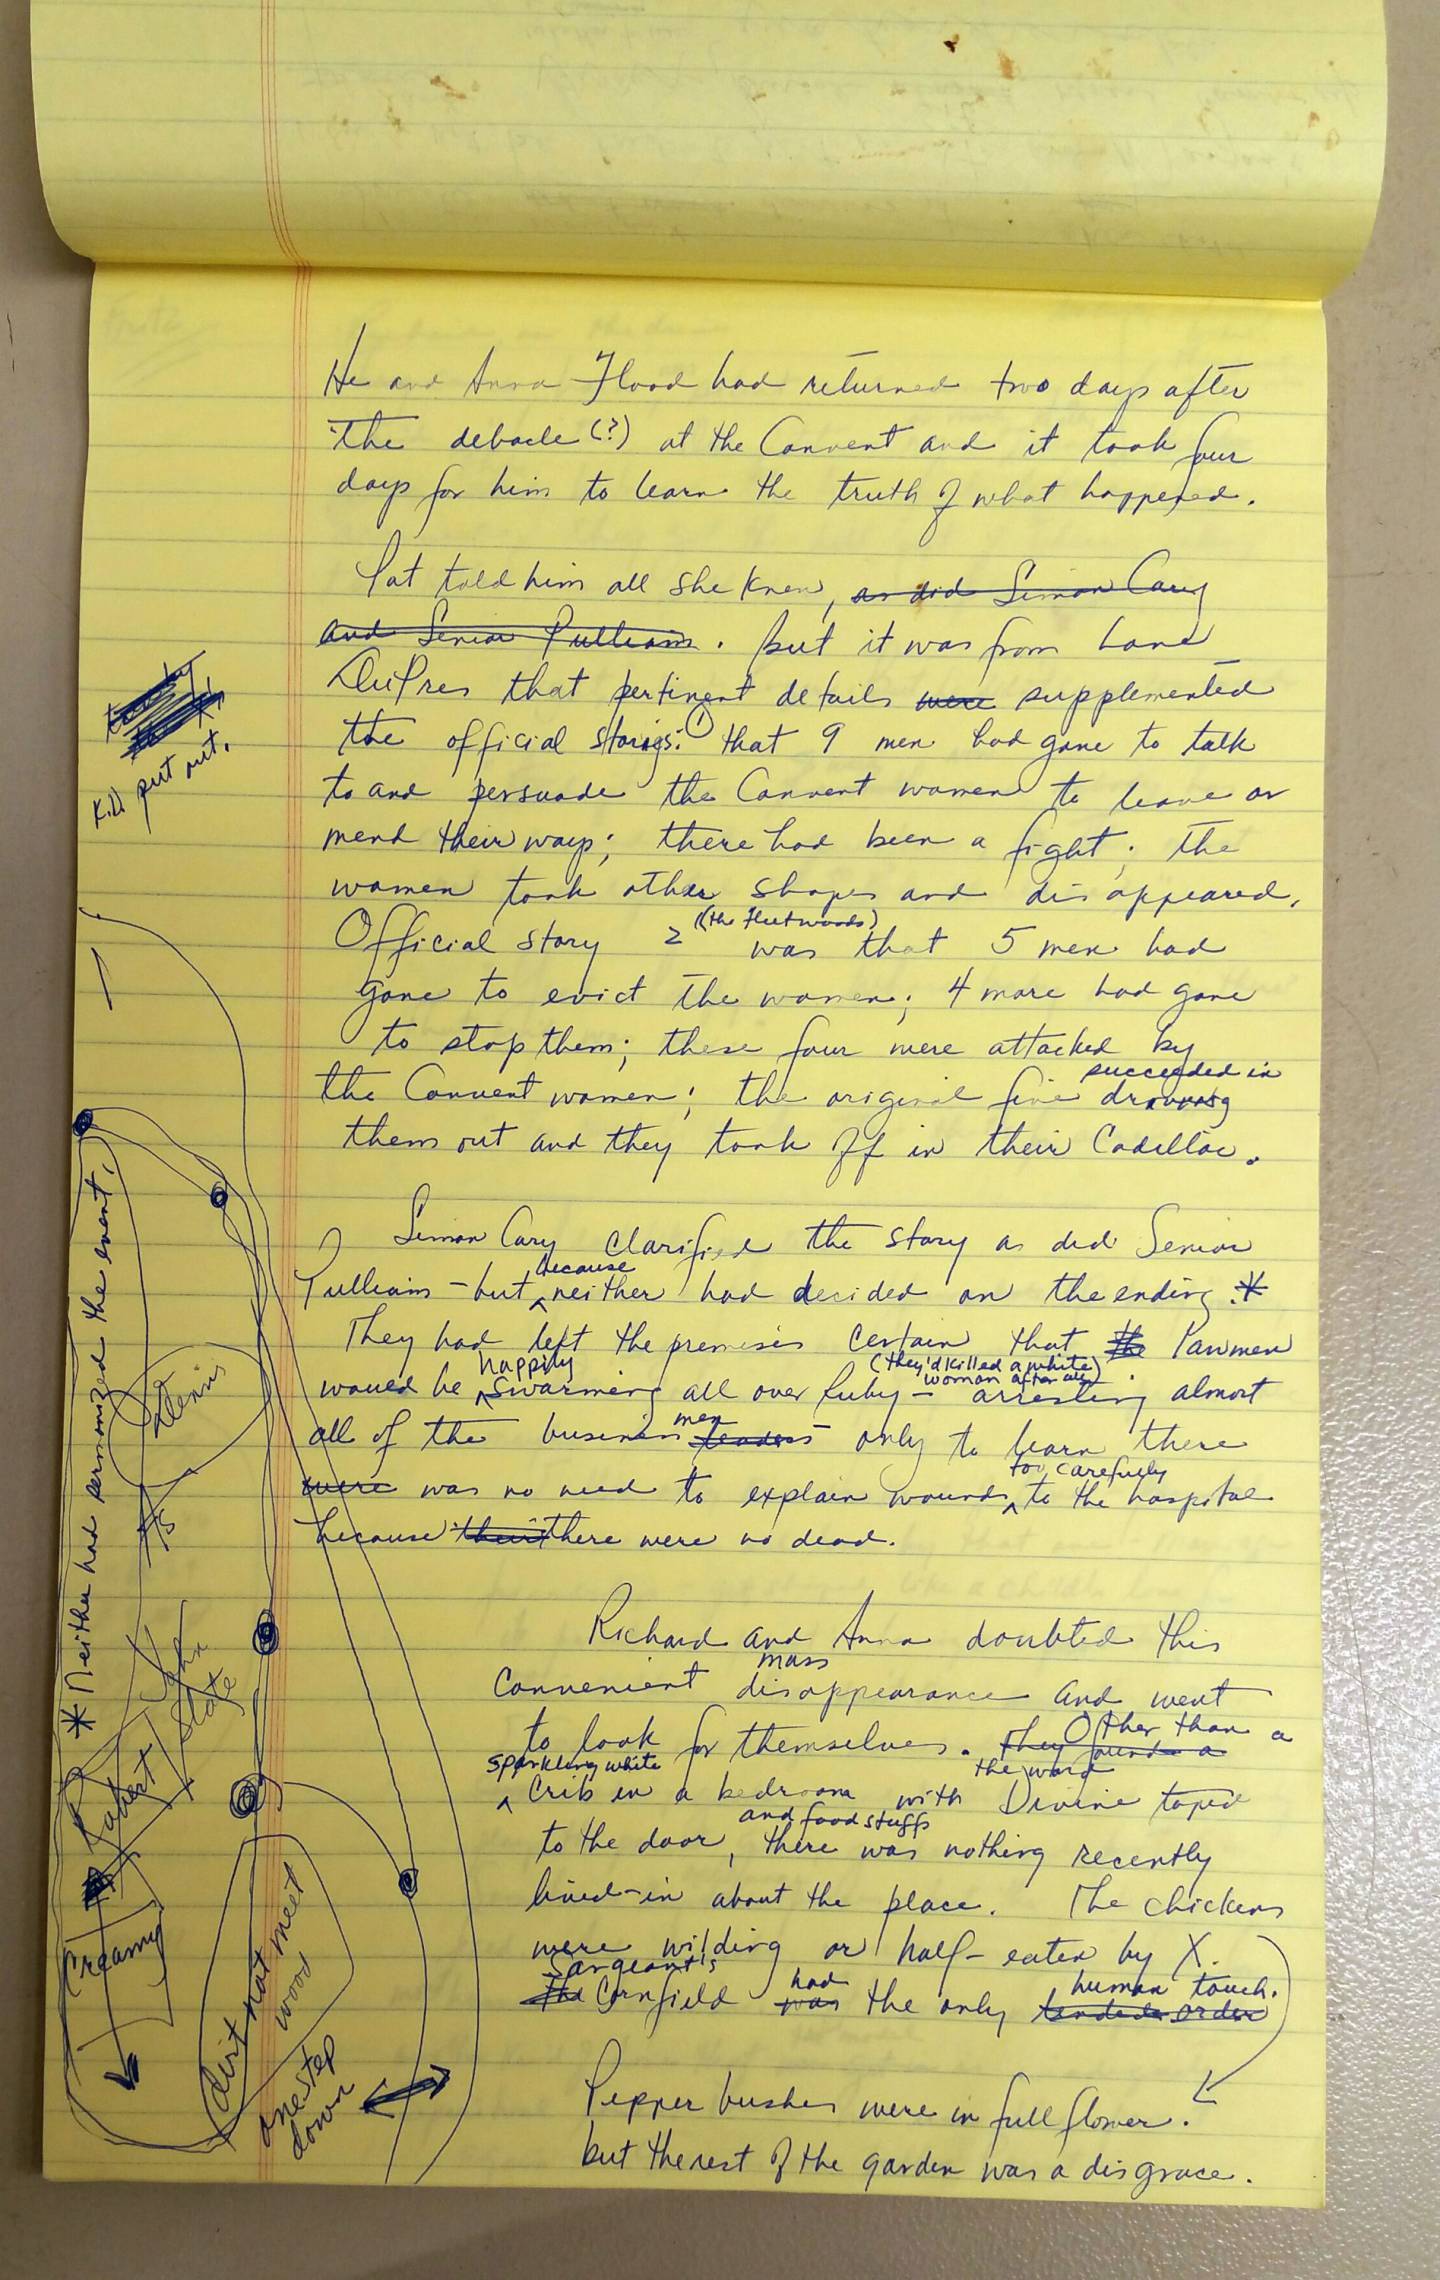 Toni Morrison's writing on a legal pad — from her novel "Paradise"